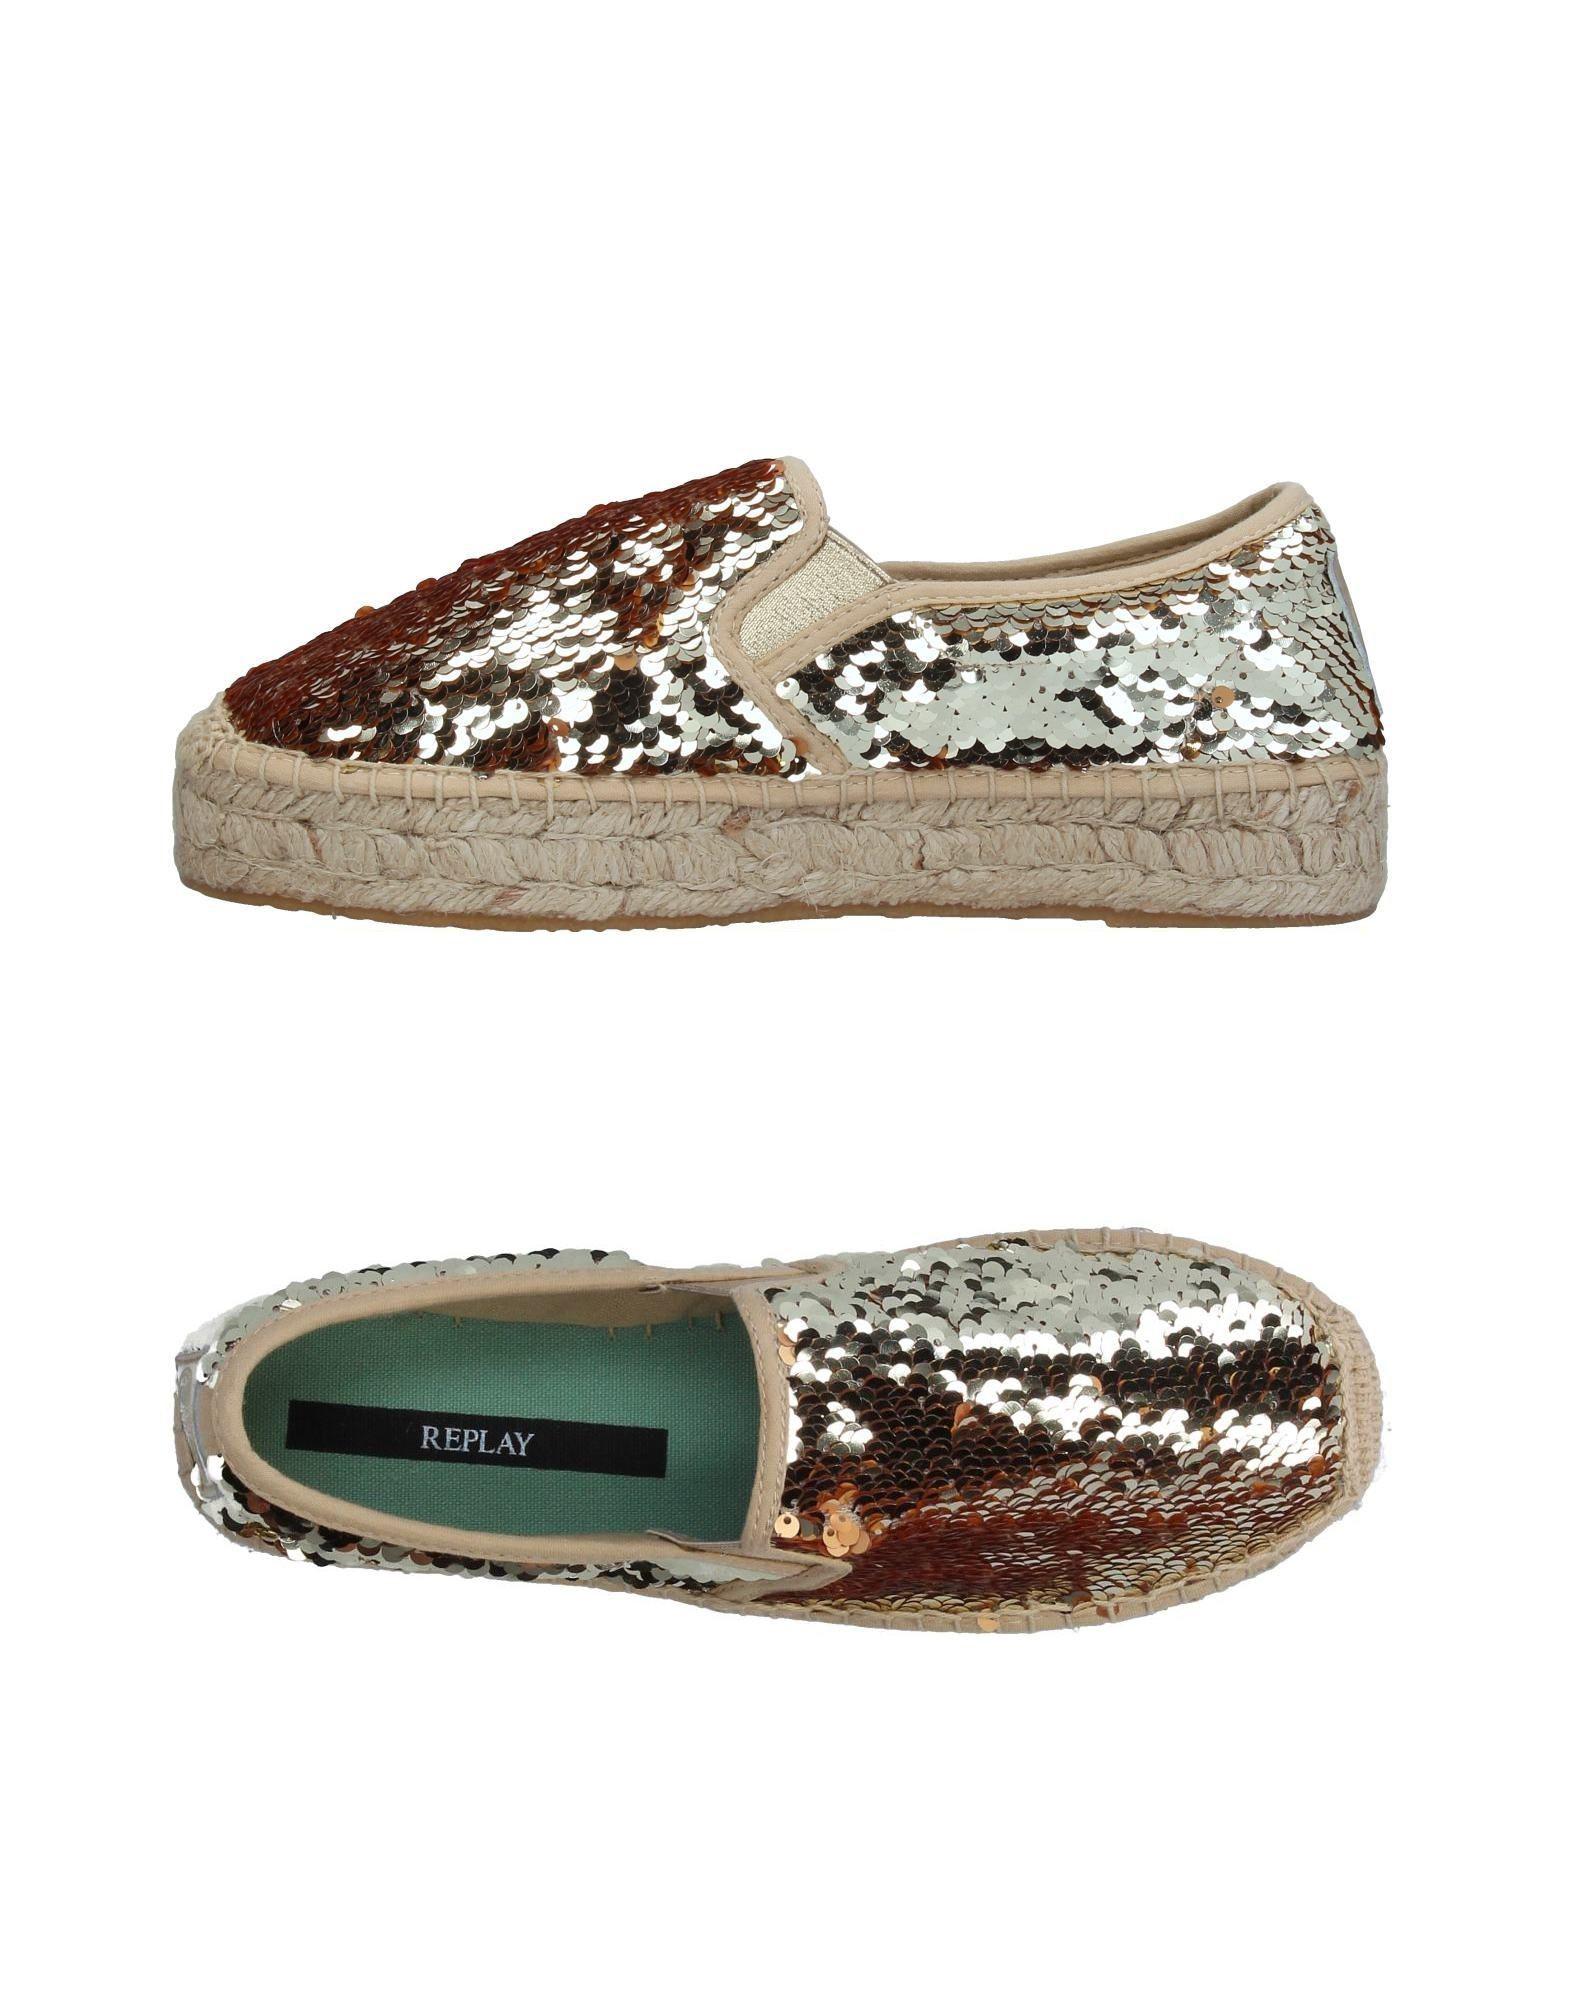 Replay Rubber Espadrilles in Gold 